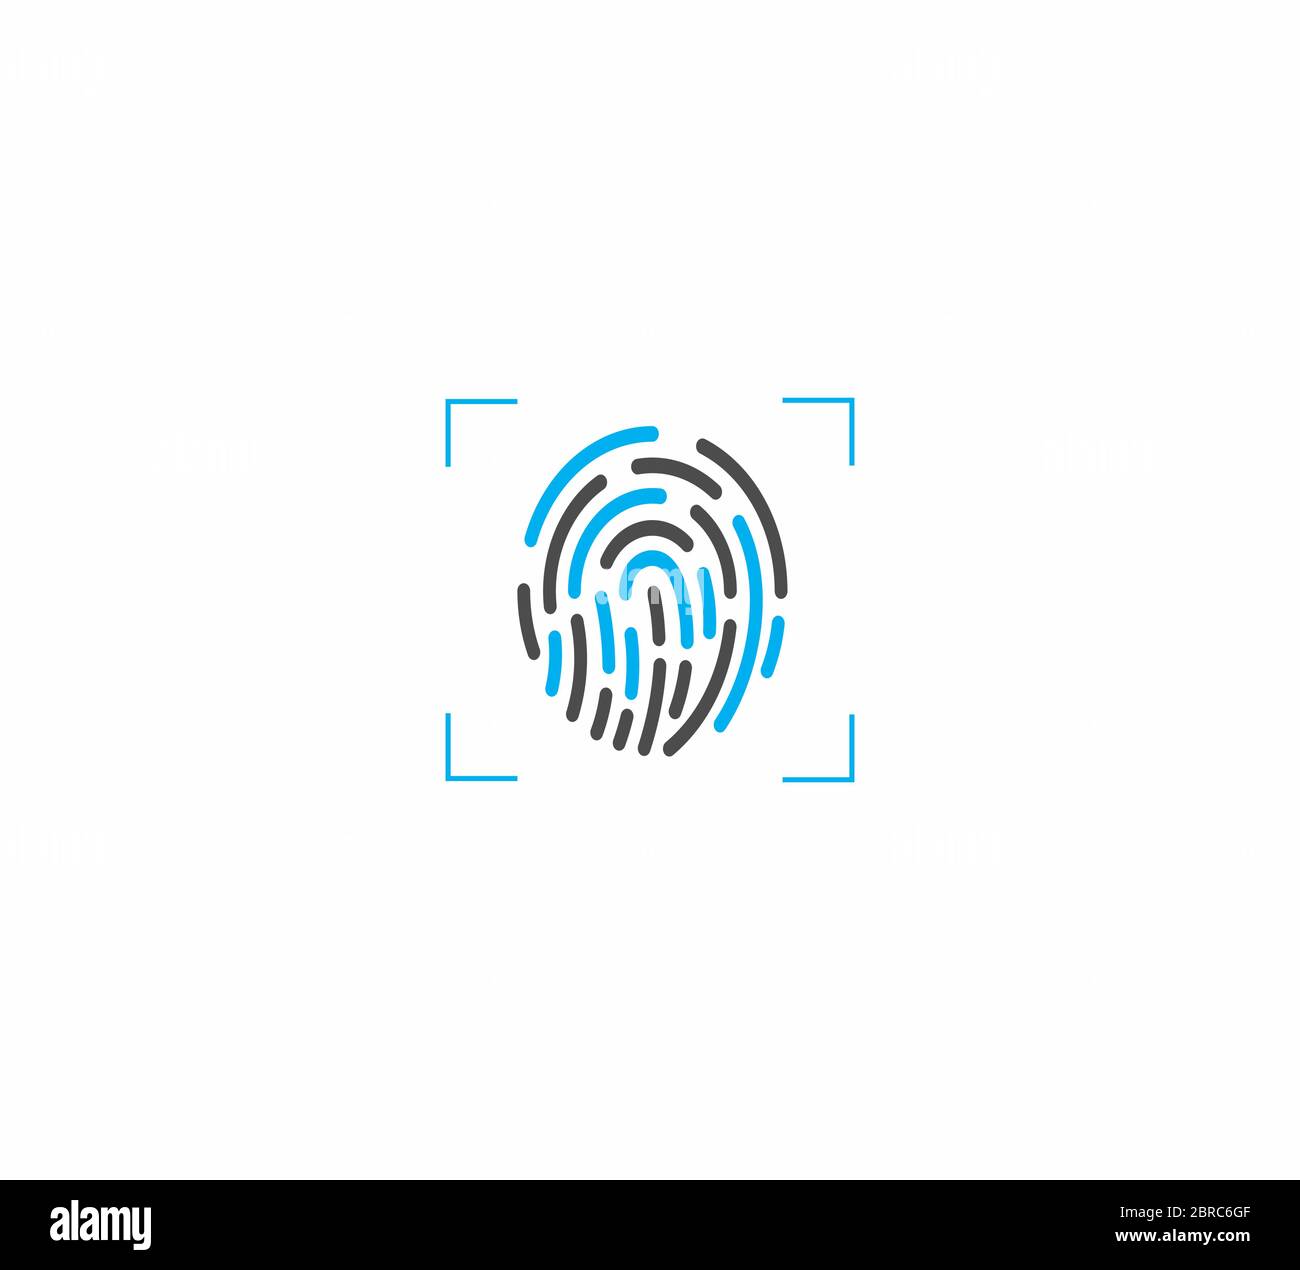 Fingerprint scanning, identification and security vector illustration isolated Stock Vector